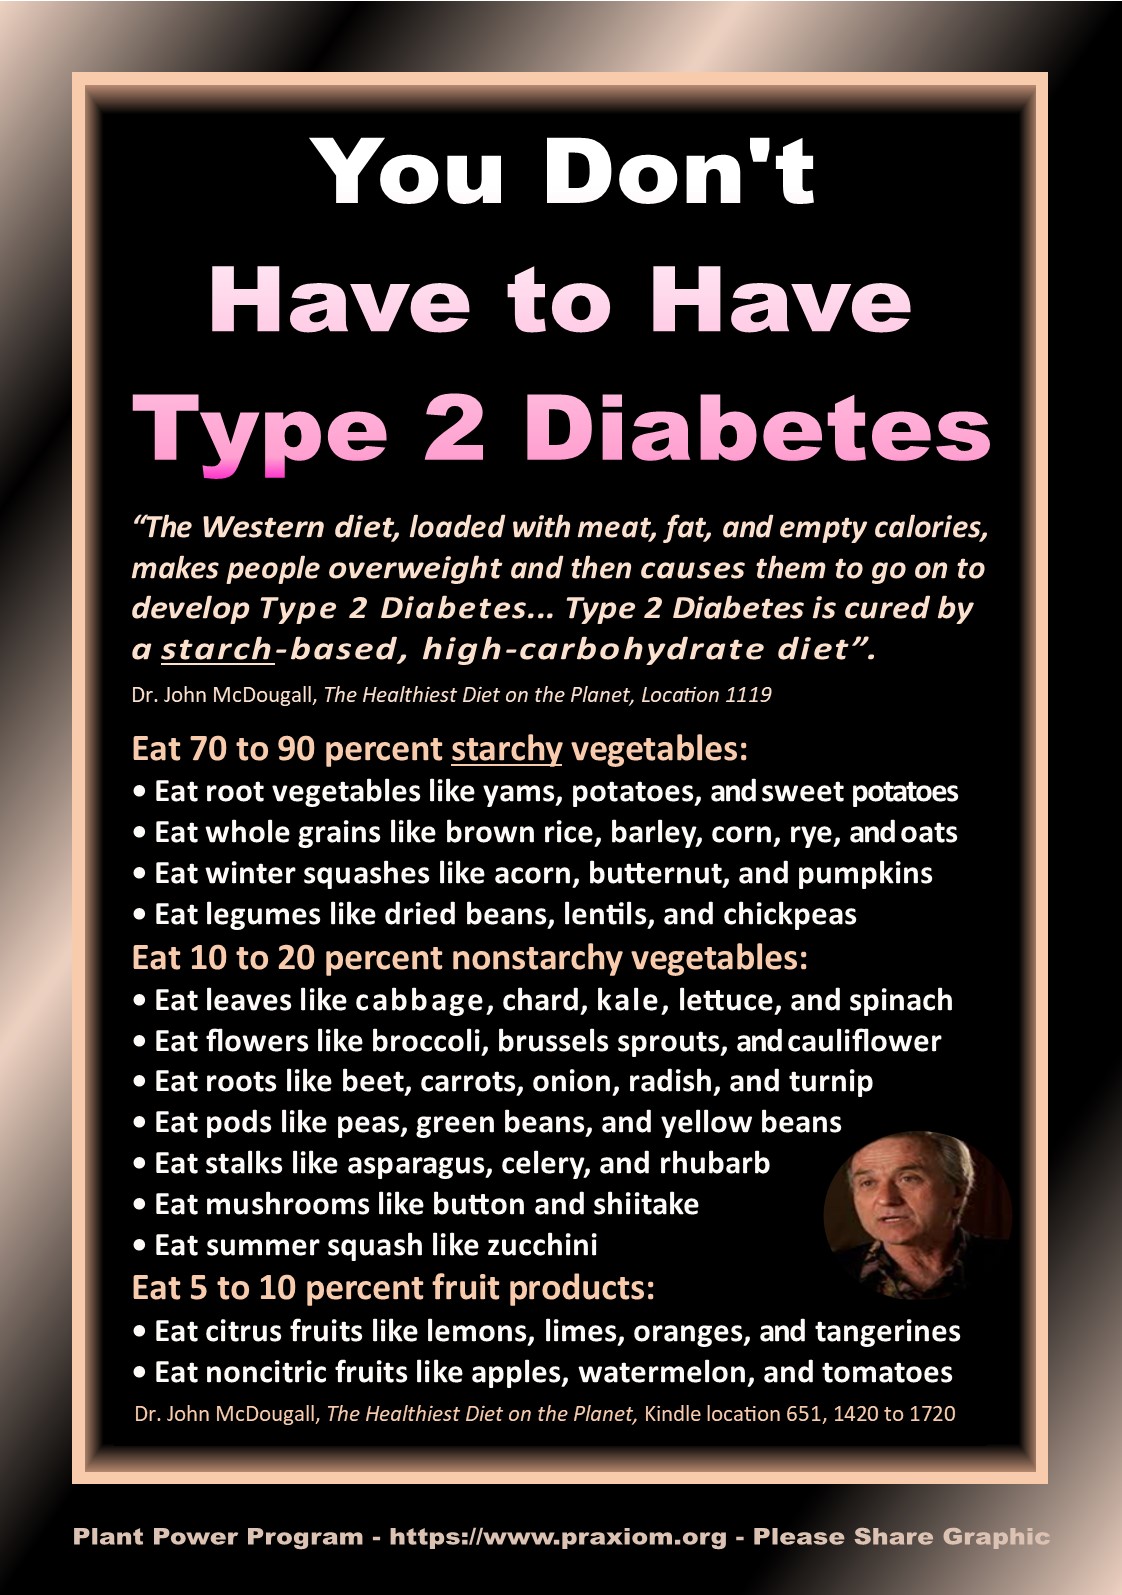 You Don't Have to Have Type 2 Diabetes